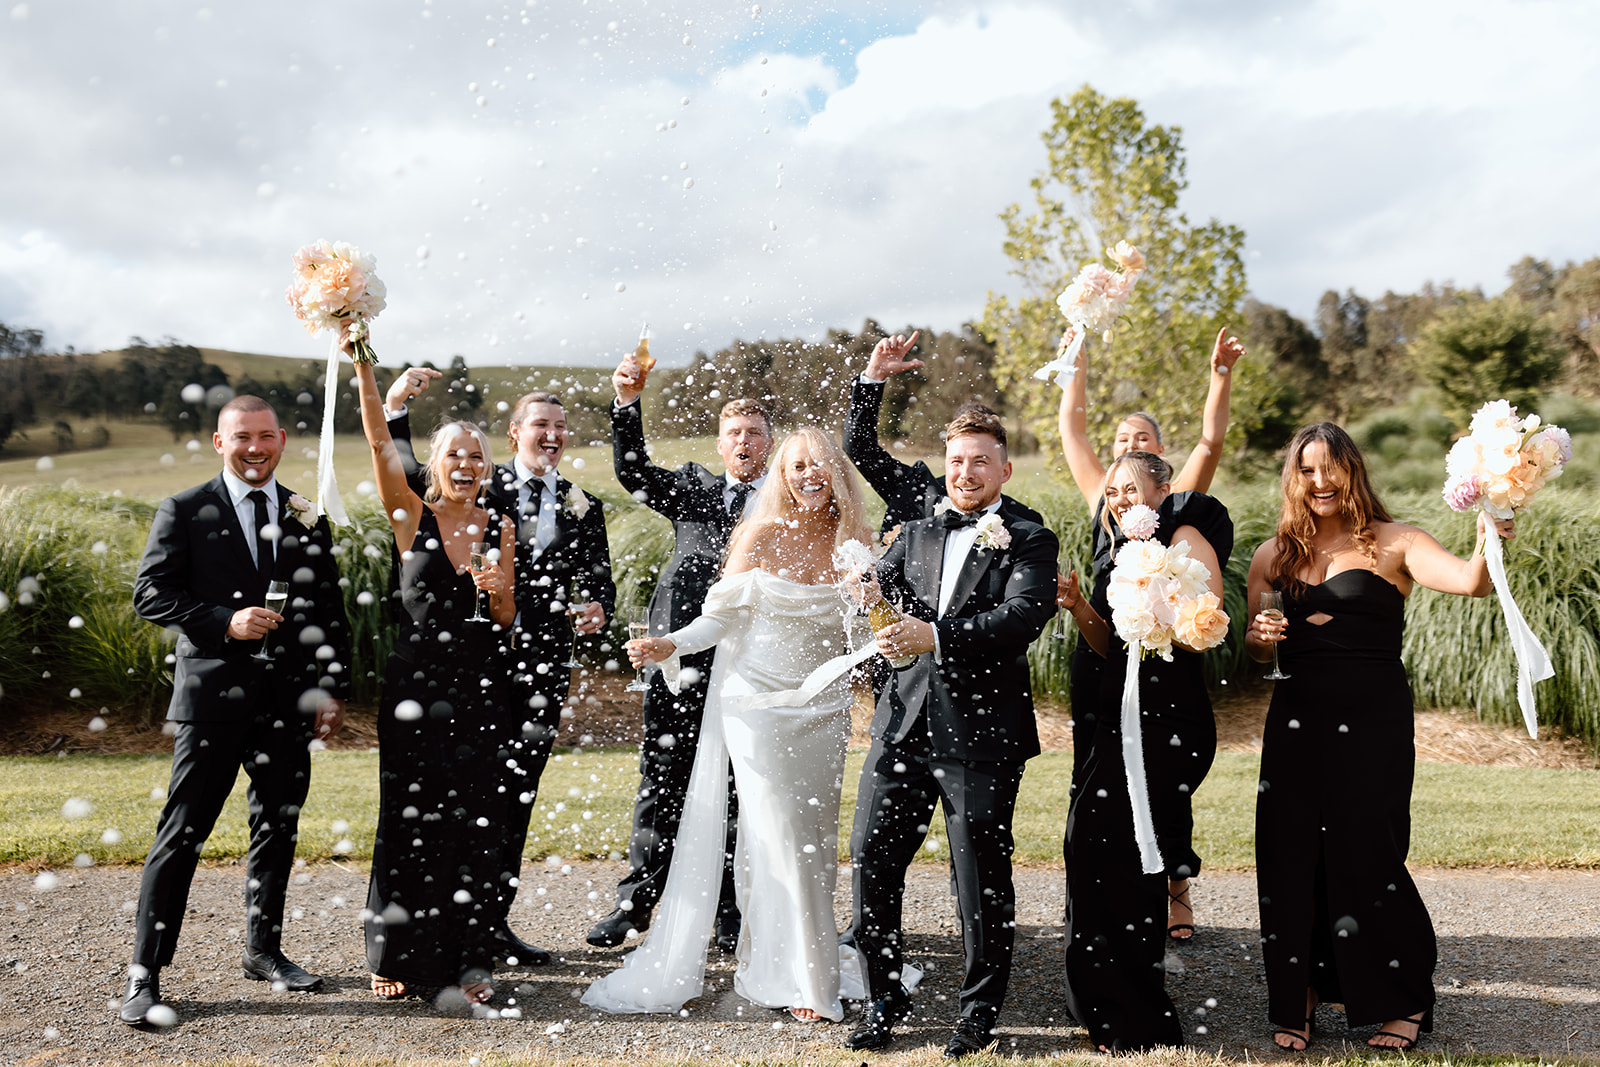 Couple together with their bridal party at the wedding in the Southern Highlands Bendooley Estate